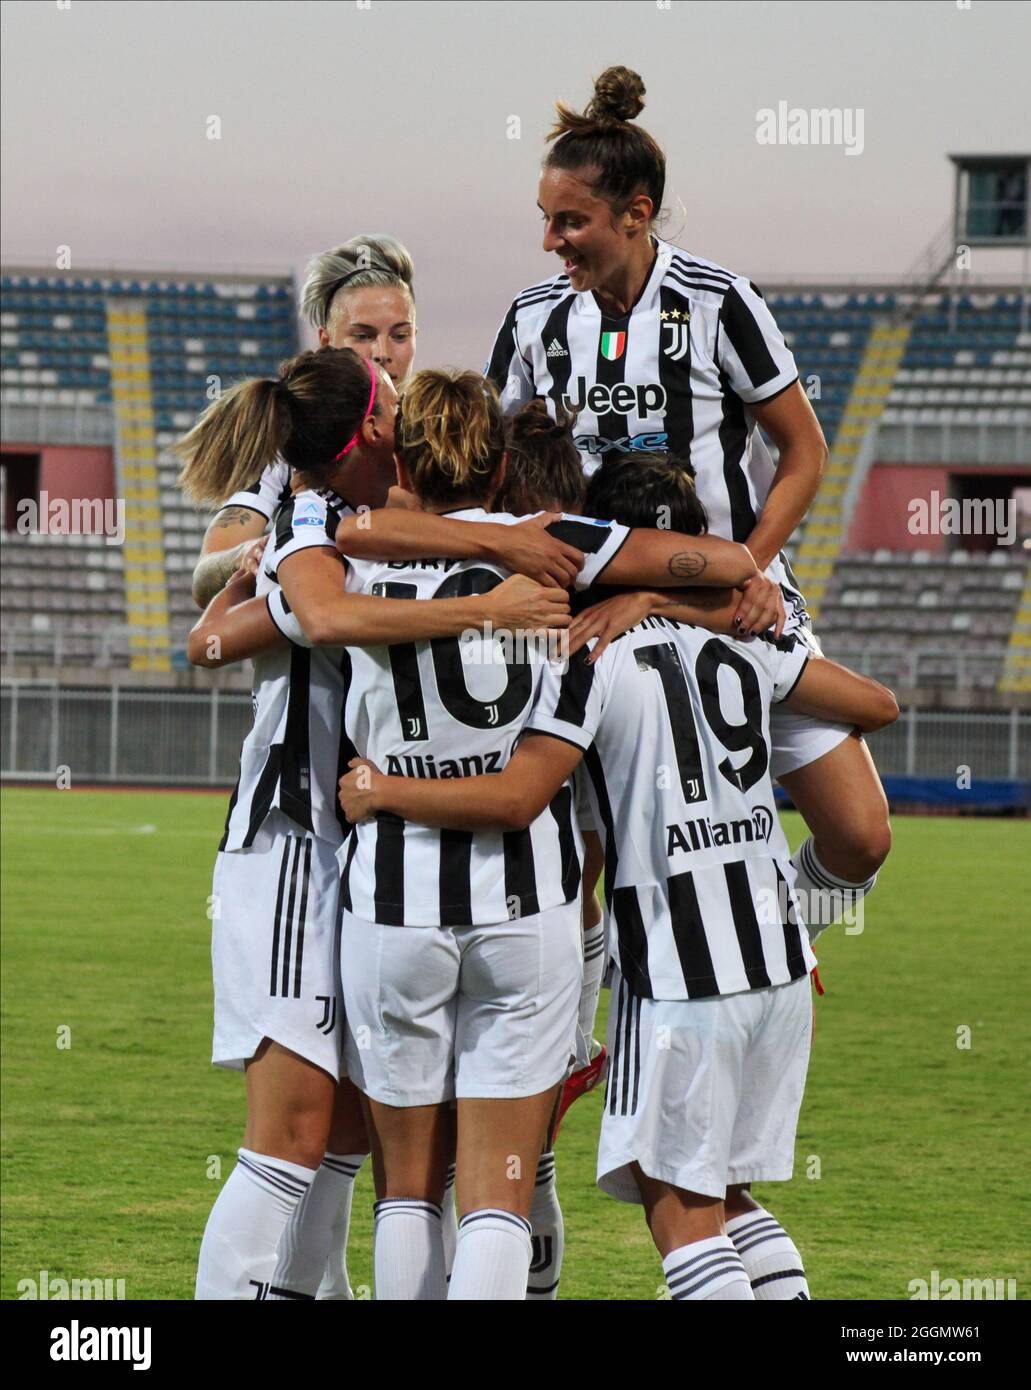 Scutari, Albania. 01st Sep, 2021. Juventus Women Team celebrating the first  goal of the match scored by Cristiana Girelli (Juventus Women) during the  UEFA Women's Champions League, Round 2, football match between